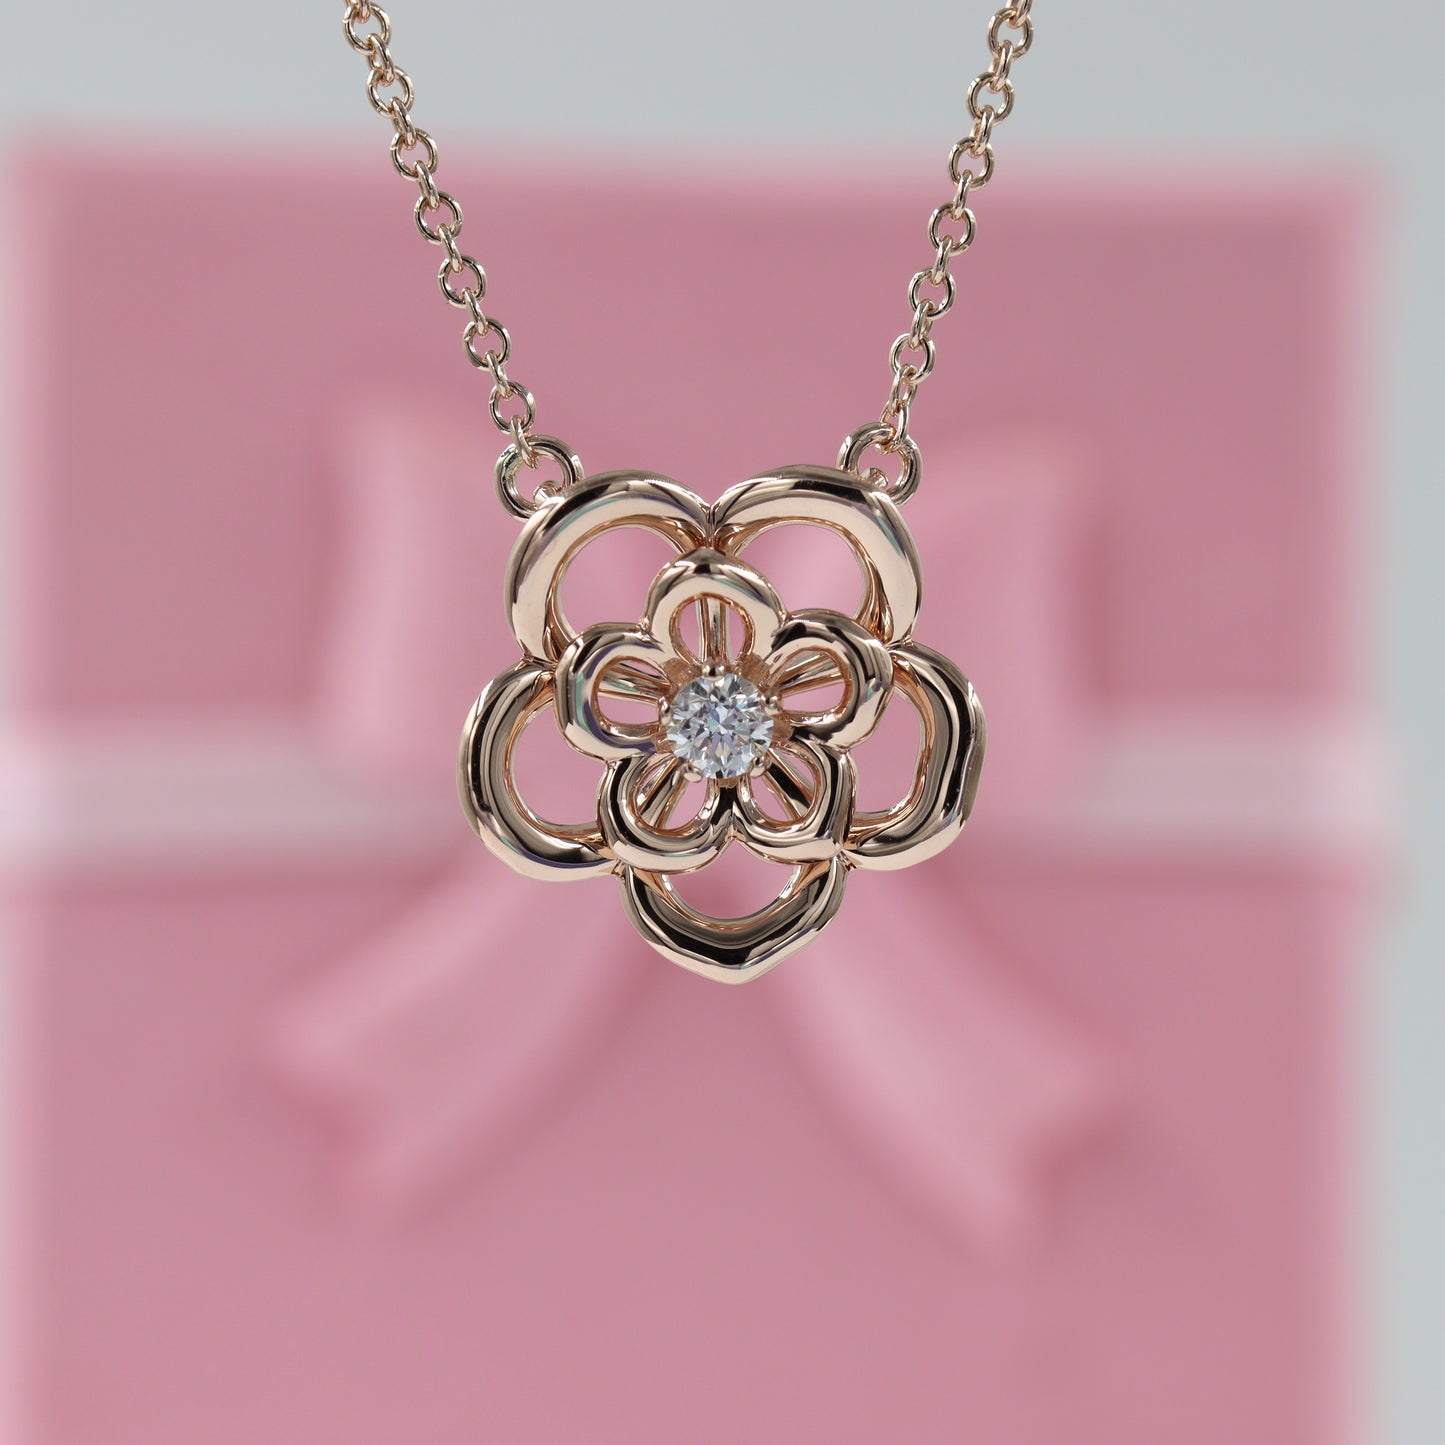 Diamond Necklace / Rose Diamond Pendant / Diamond Flower Necklace / Unique /14K Solid Gold Diamond Necklace /Anniversary Gift / Gift for Her